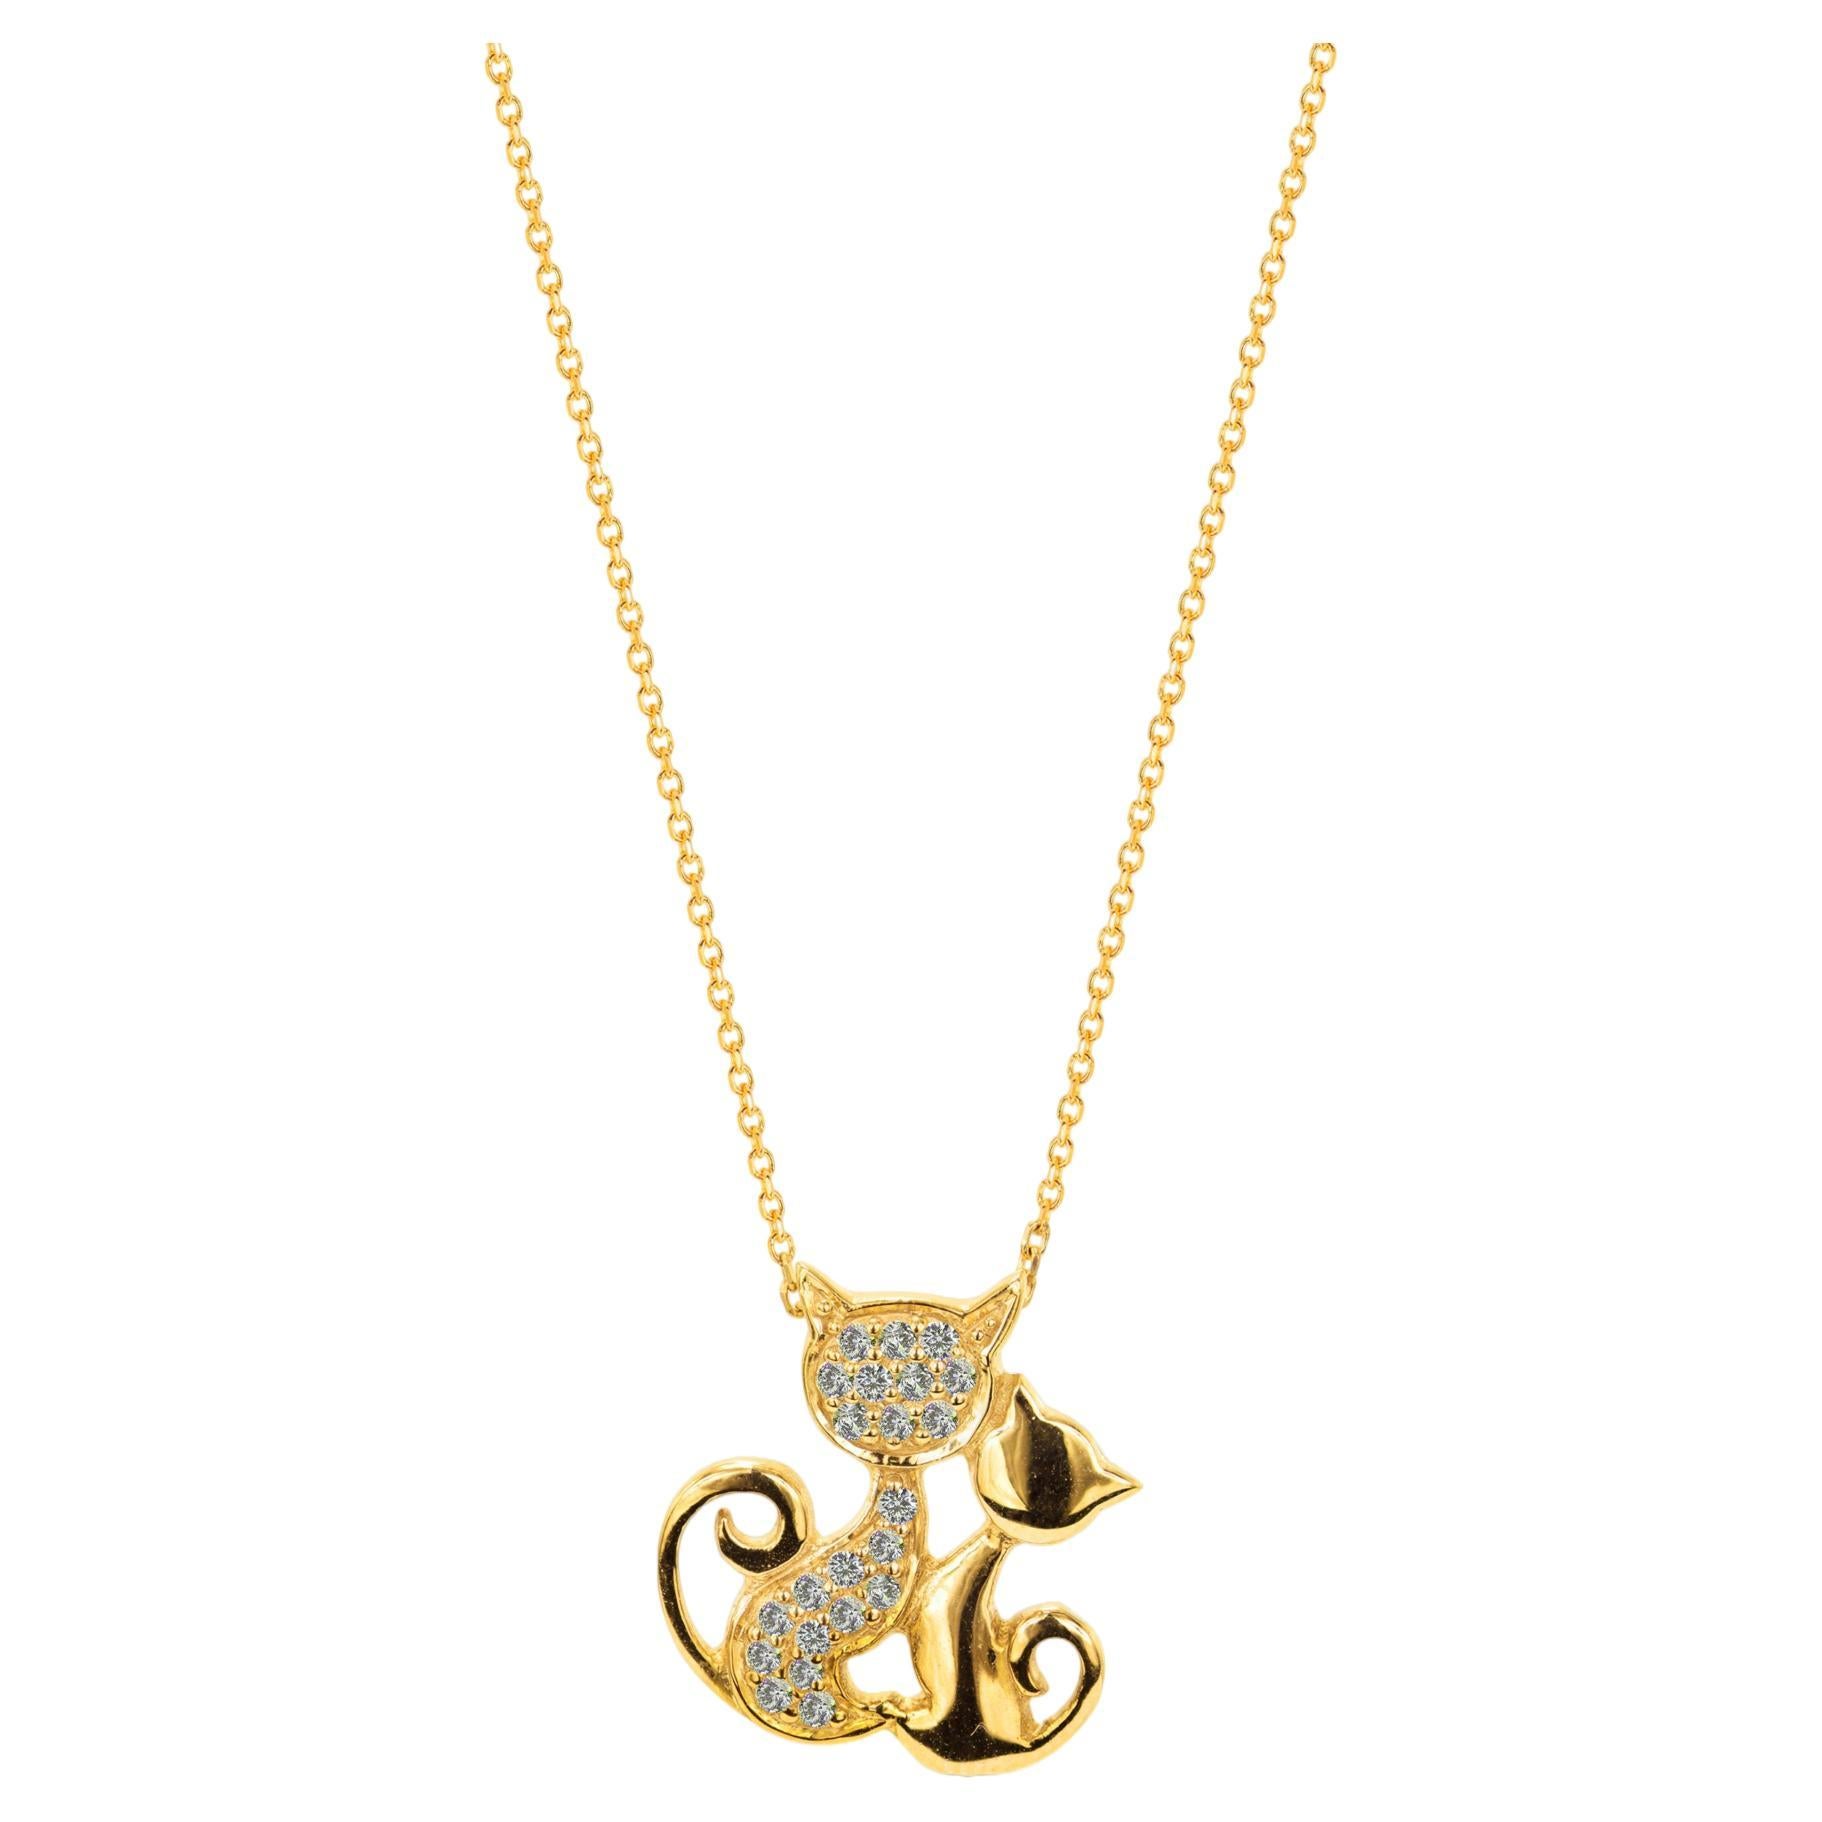 18k White and Yellow Gold Diamond Cat Charm Necklace Two Tone Diamond Necklace